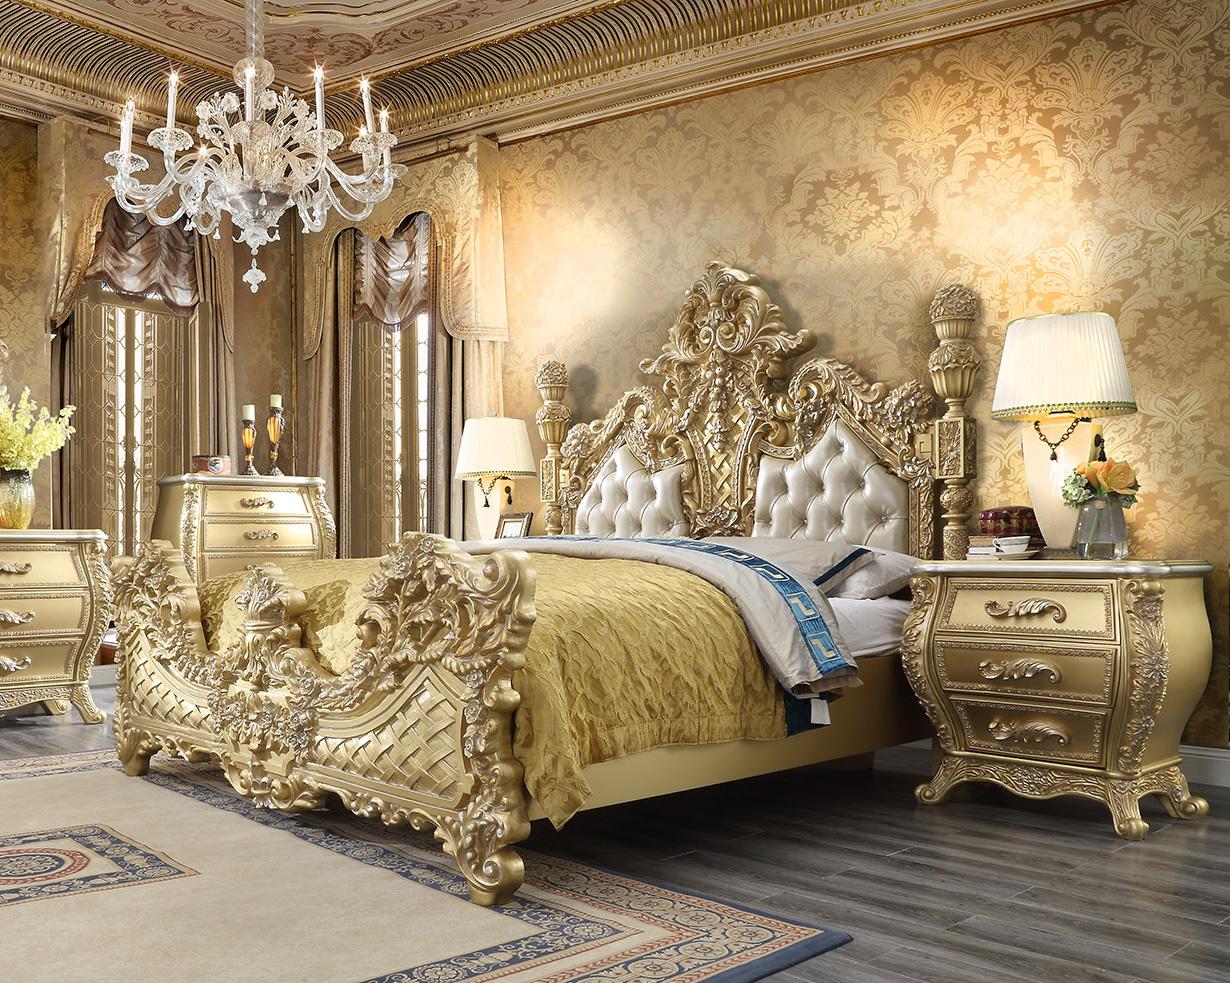 

    
Antique Gold & Leather CAL King Bedroom Set 6Pcs Traditional Homey Design HD-1801
